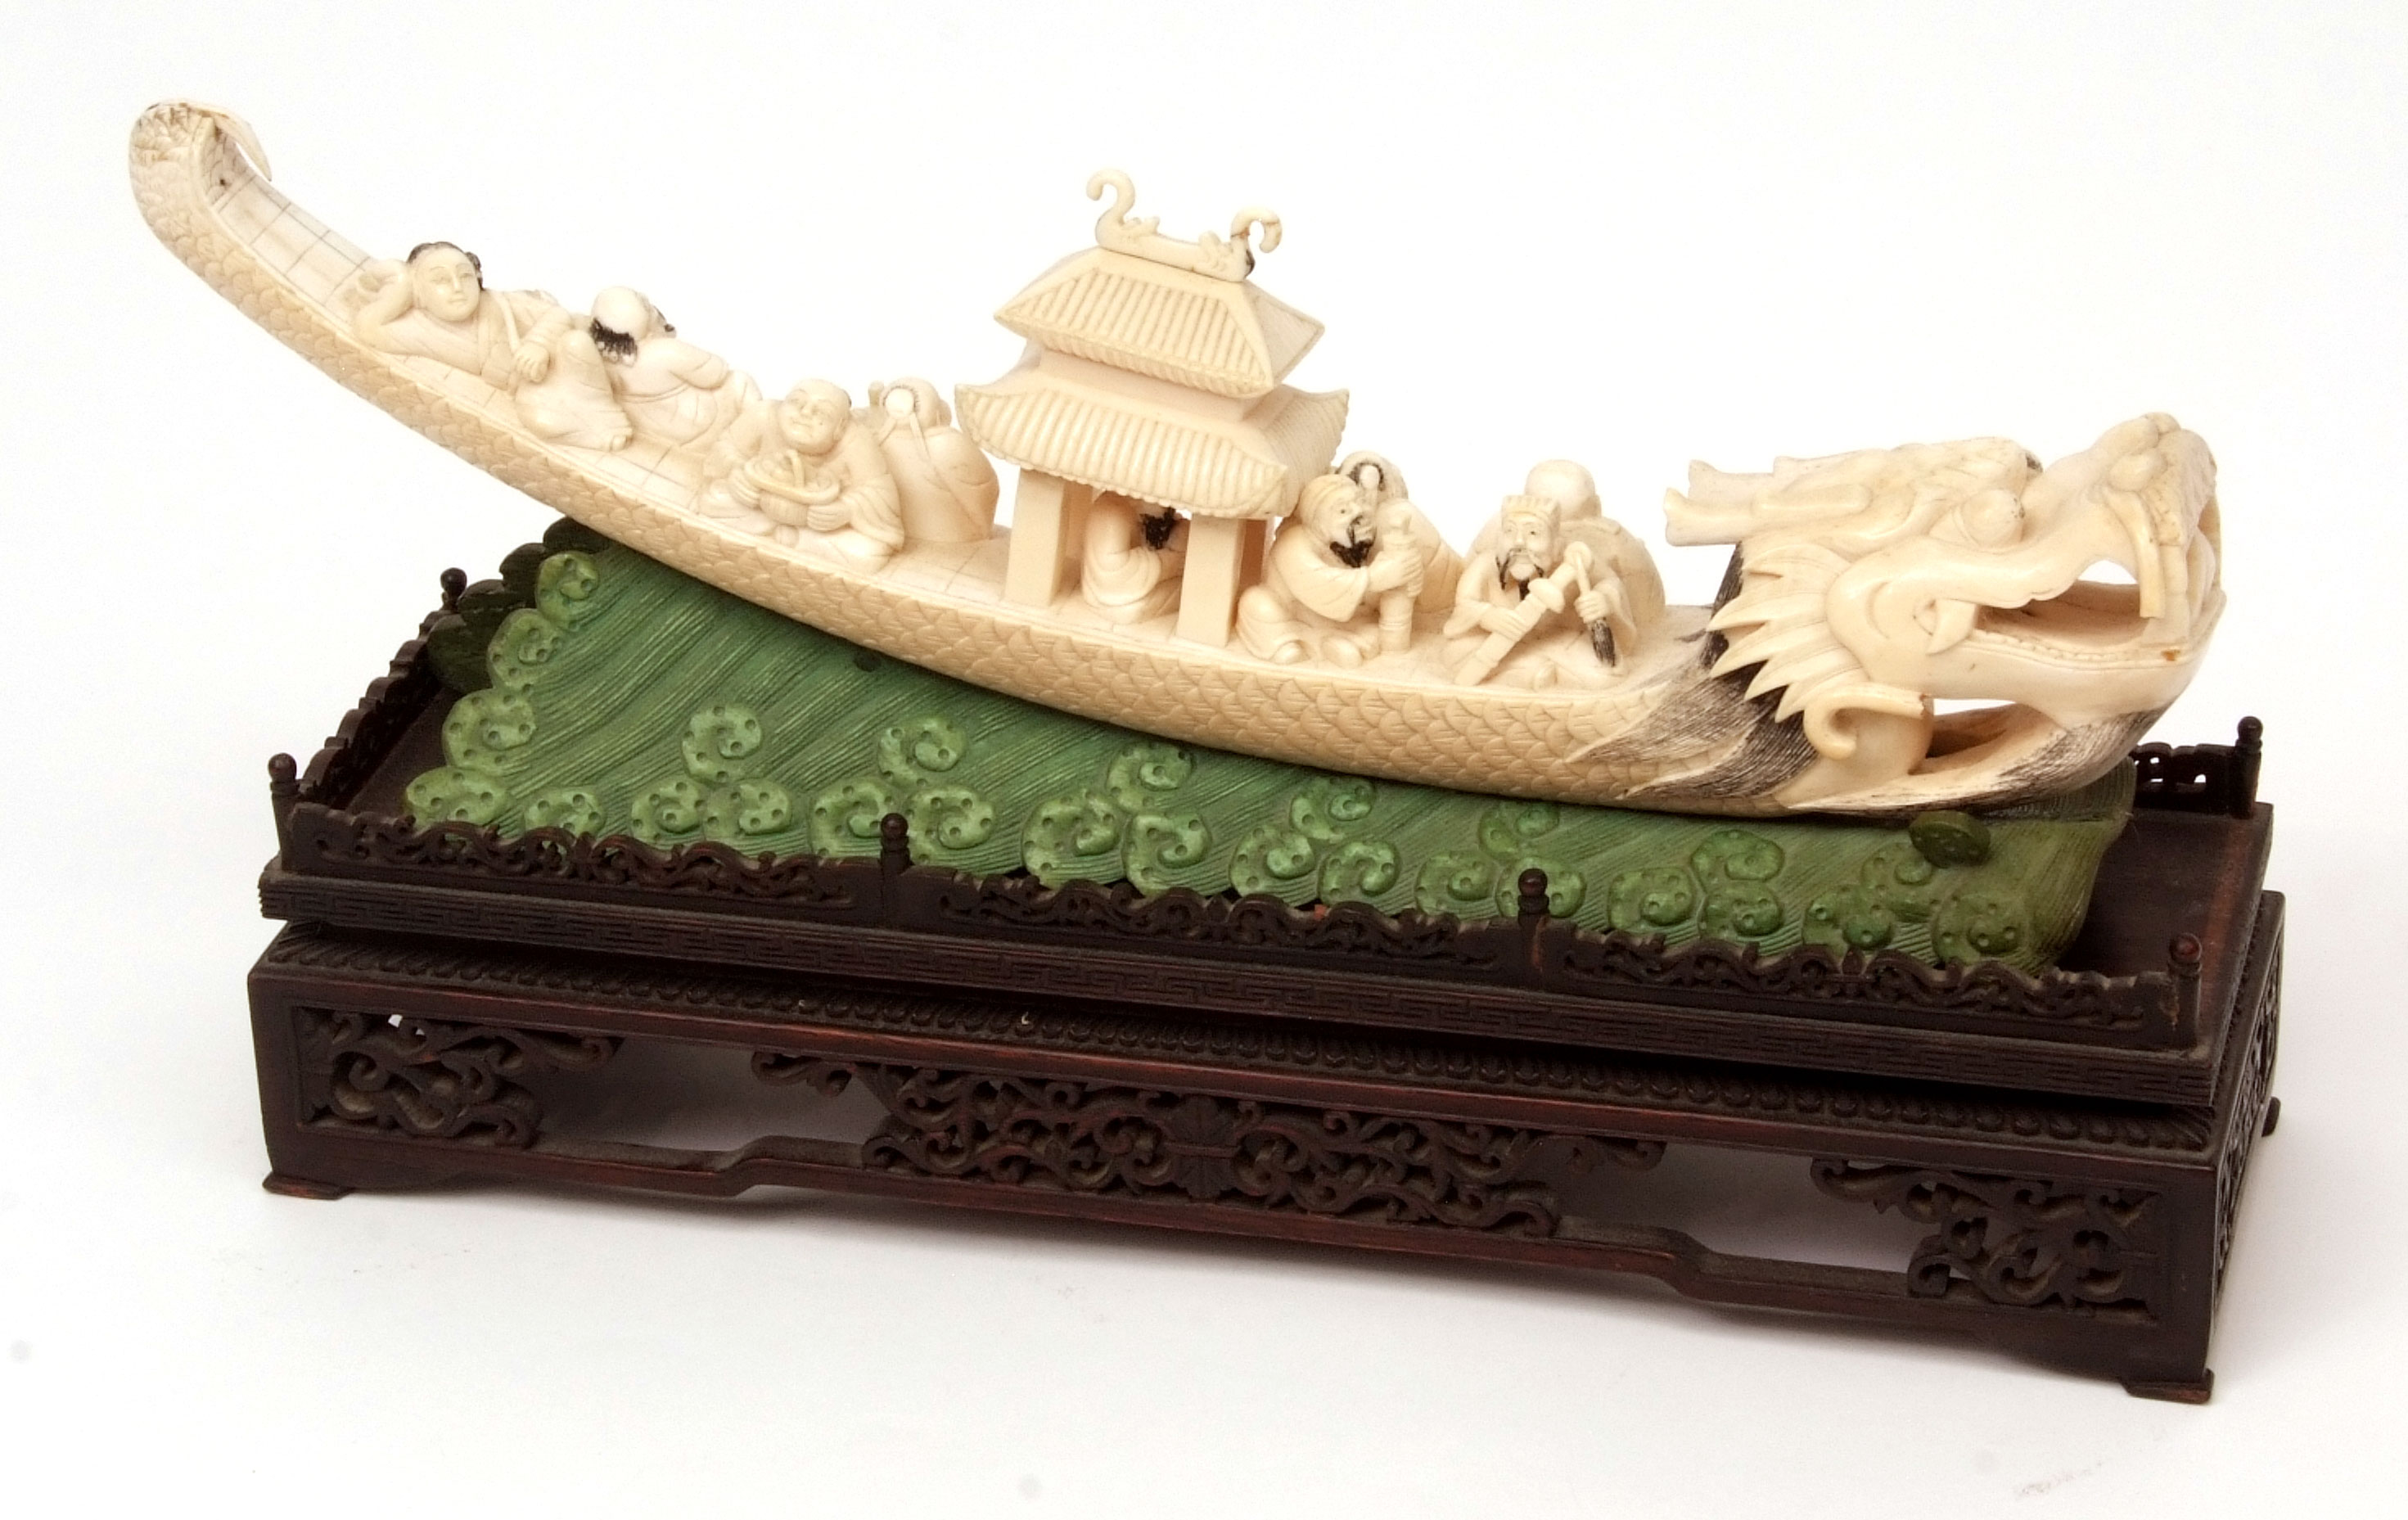 Chinese ivory carving of the lucky gods aboard a dragon pleasure boat set upon a green stained